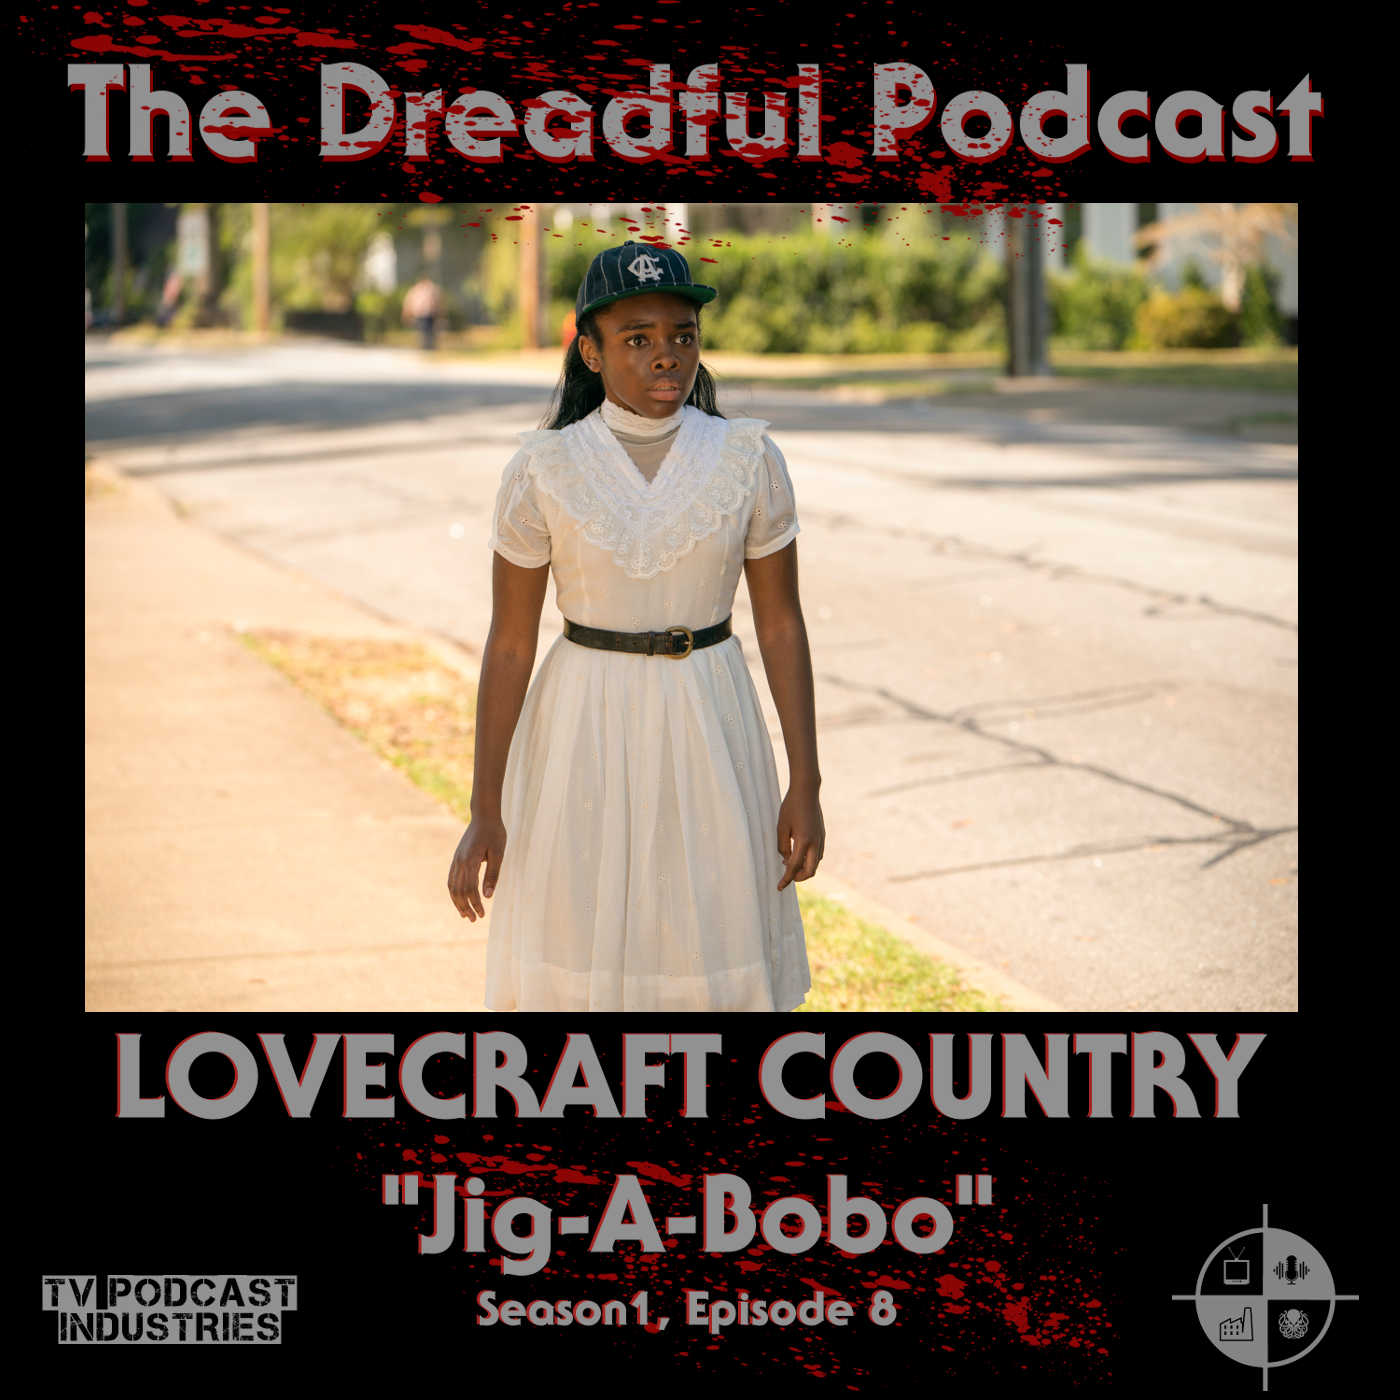 Lovecraft Country Episode 8 “Jig-A-Bobo” Review